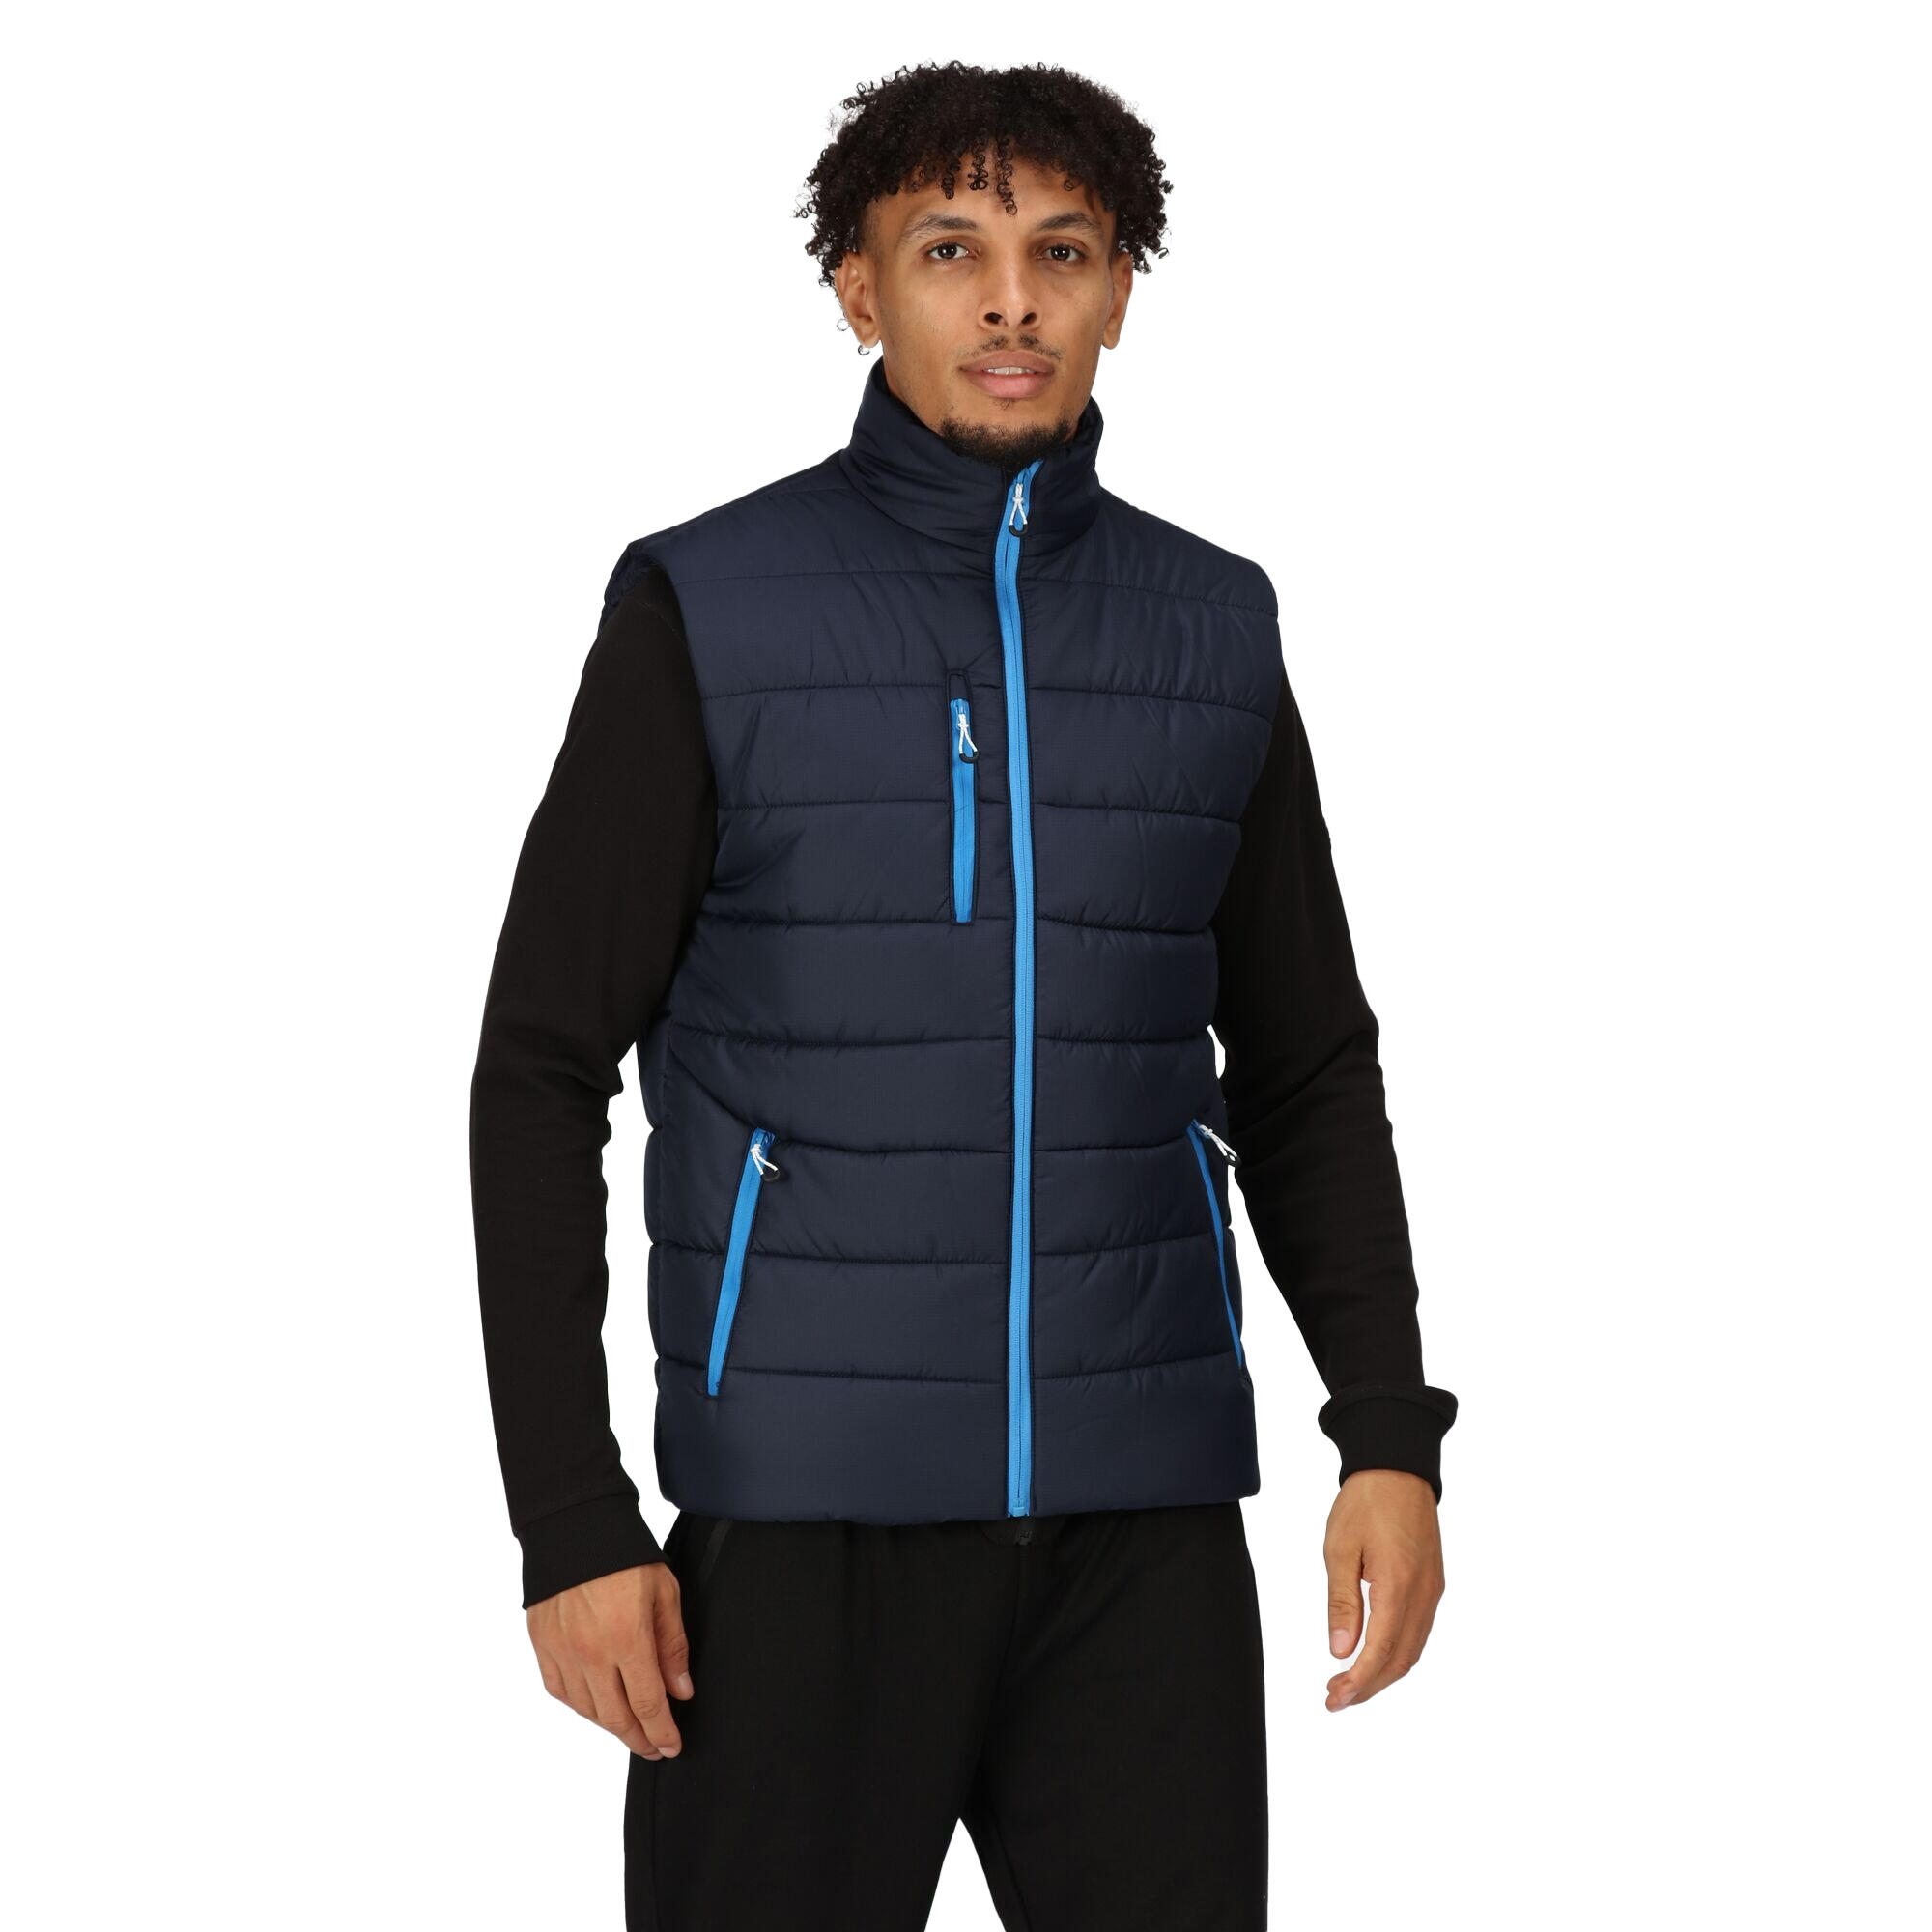 Mens Navigate Thermal Body Warmer (Navy/French Blue) 3/5